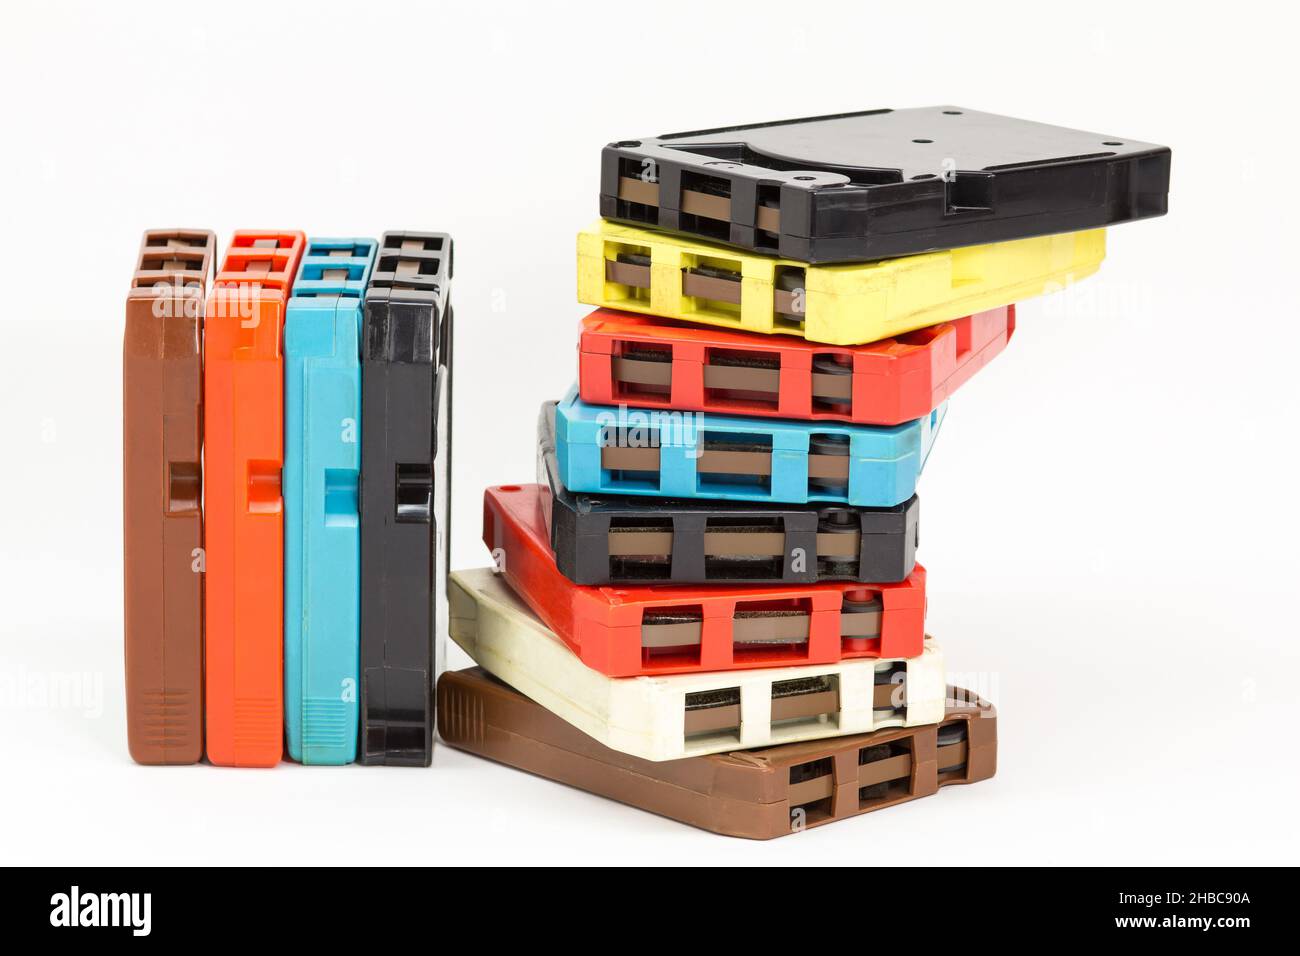 Many old 8-track audio tapes of different colors Stock Photo